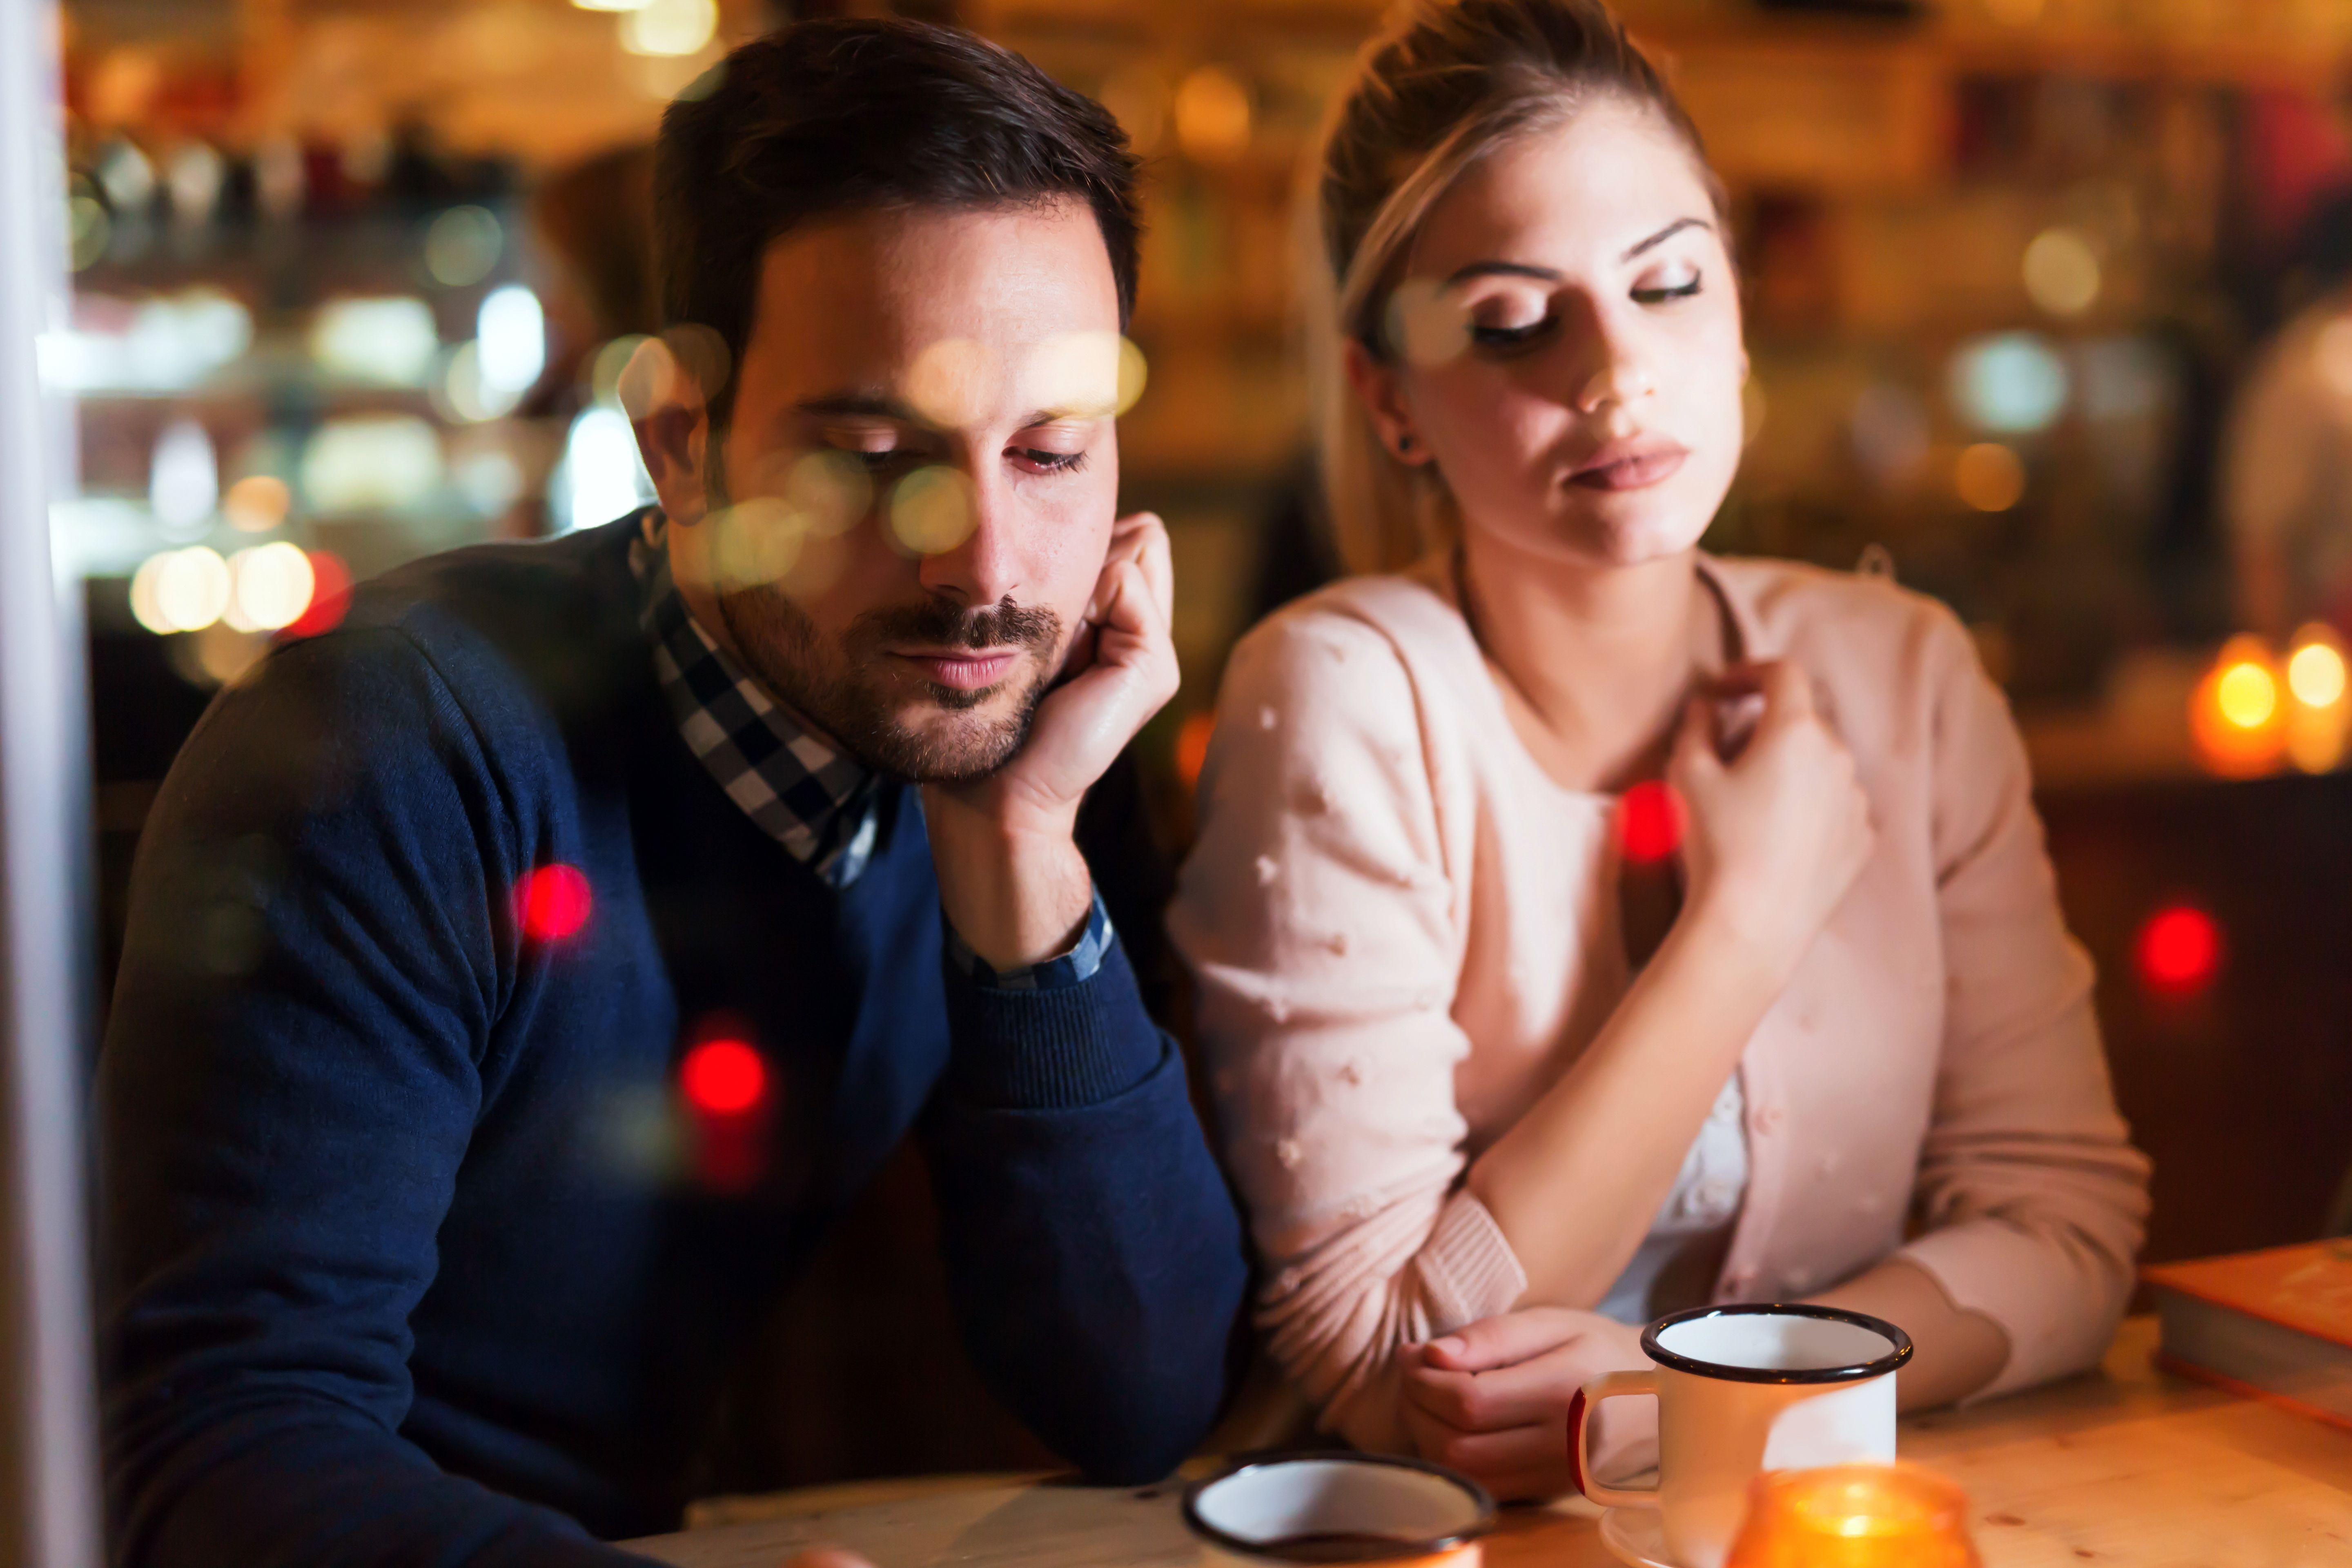 A bored couple in a cafe, showing signs of jealousy. | Photo: Shutterstock